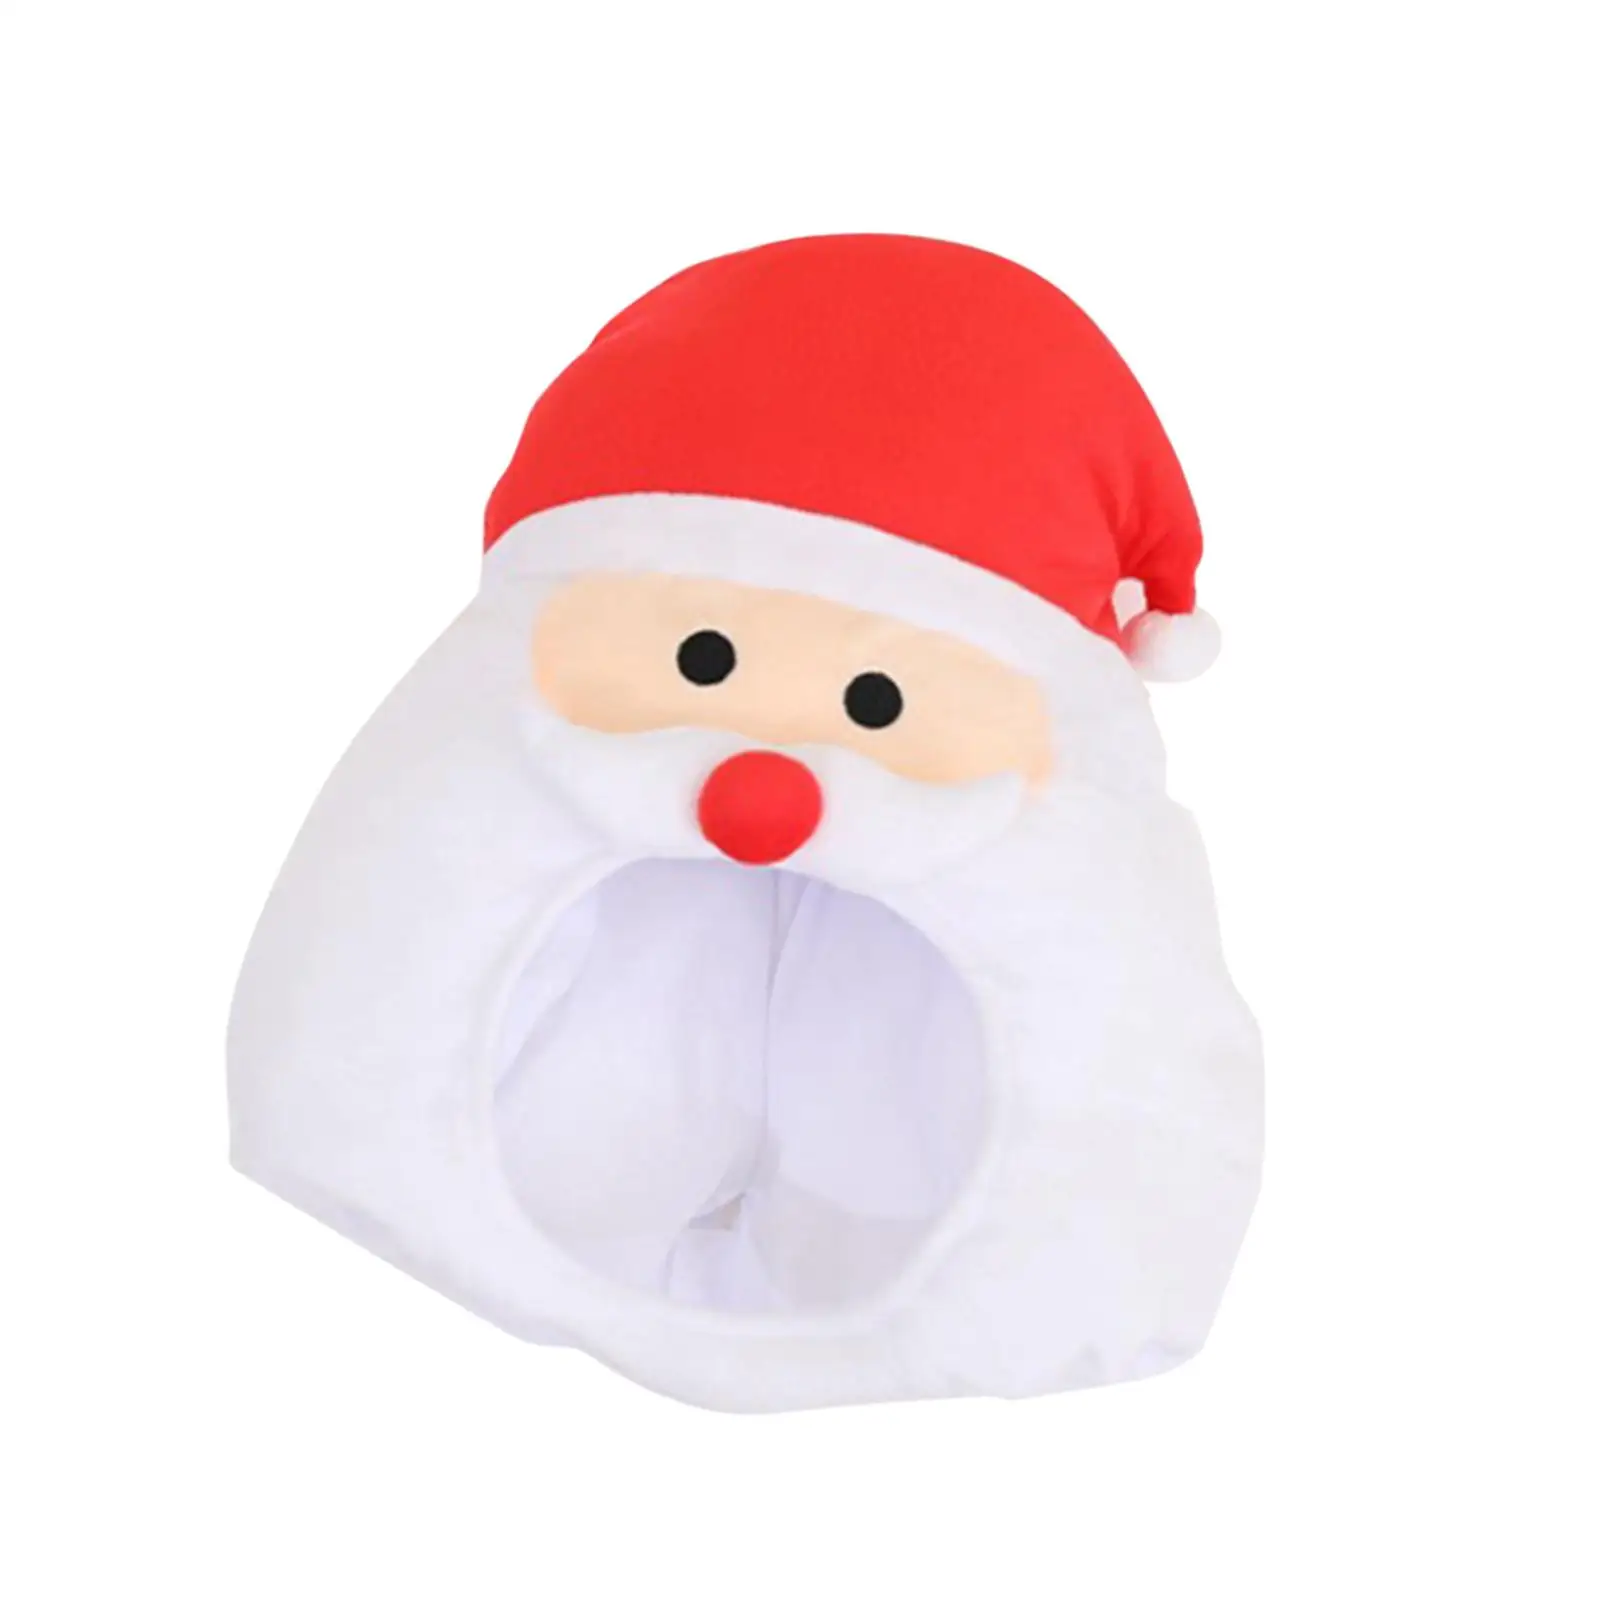 Santa Claus Hat Soft Plush Hat Fancy Dress Lovely Party Hat for Festival Role Play Stage Performance New Year Photo Props